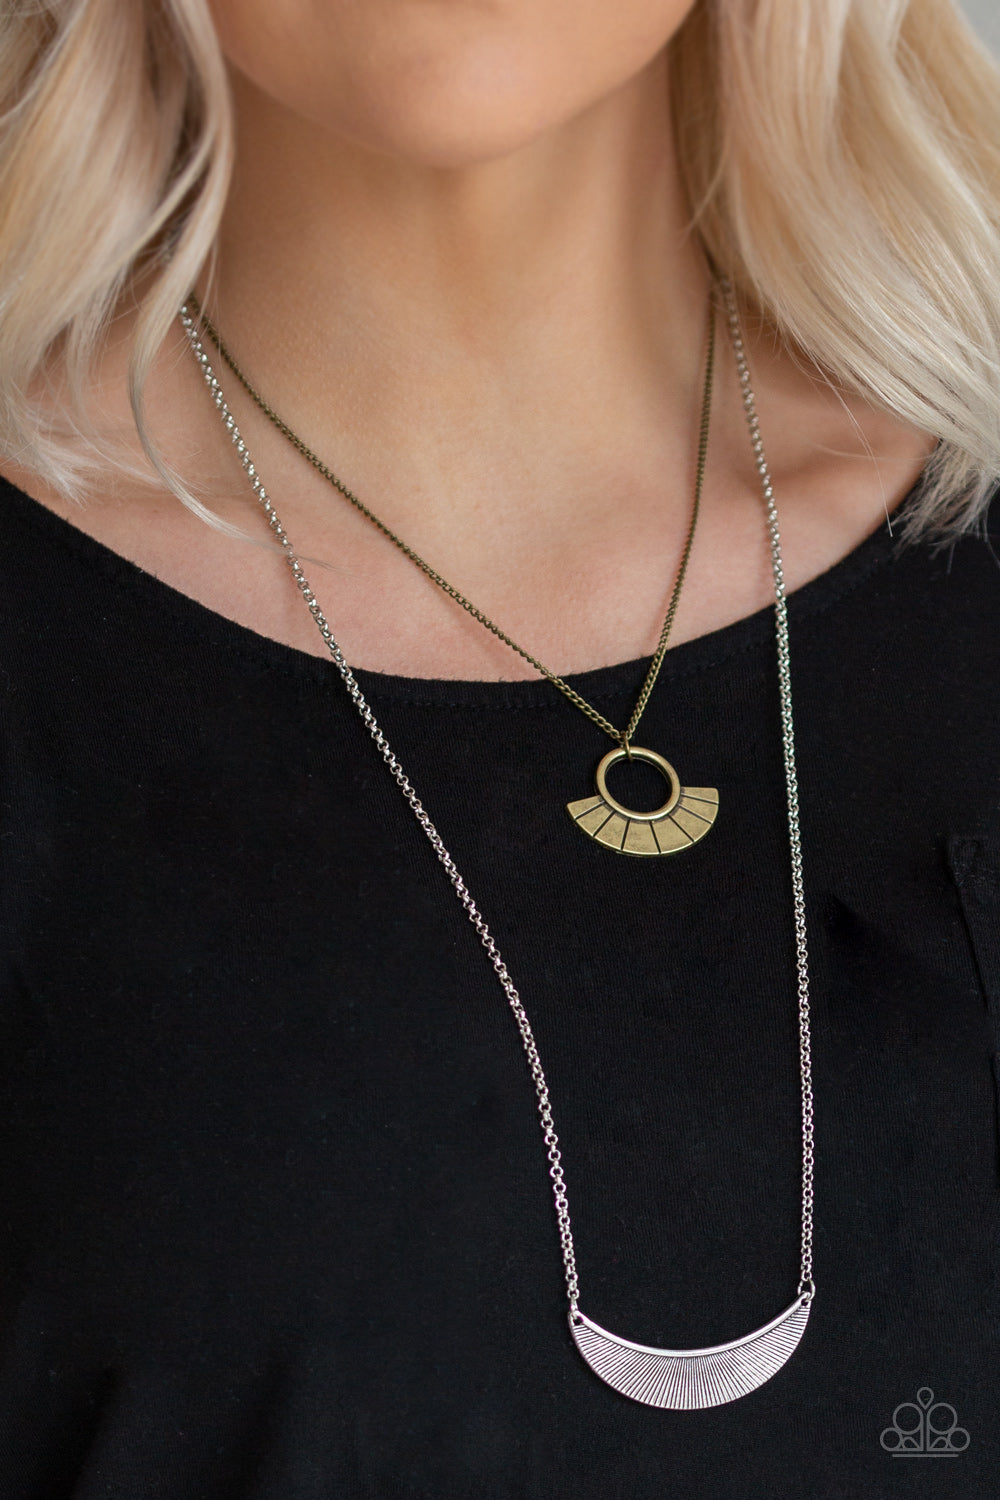 Tribal Trek - Multi Metal Necklace - Paparazzi Accessories - Brass frame swings above a silver half-moon frame, creating tribal inspired layers below the collar. Features an adjustable clasp closure.